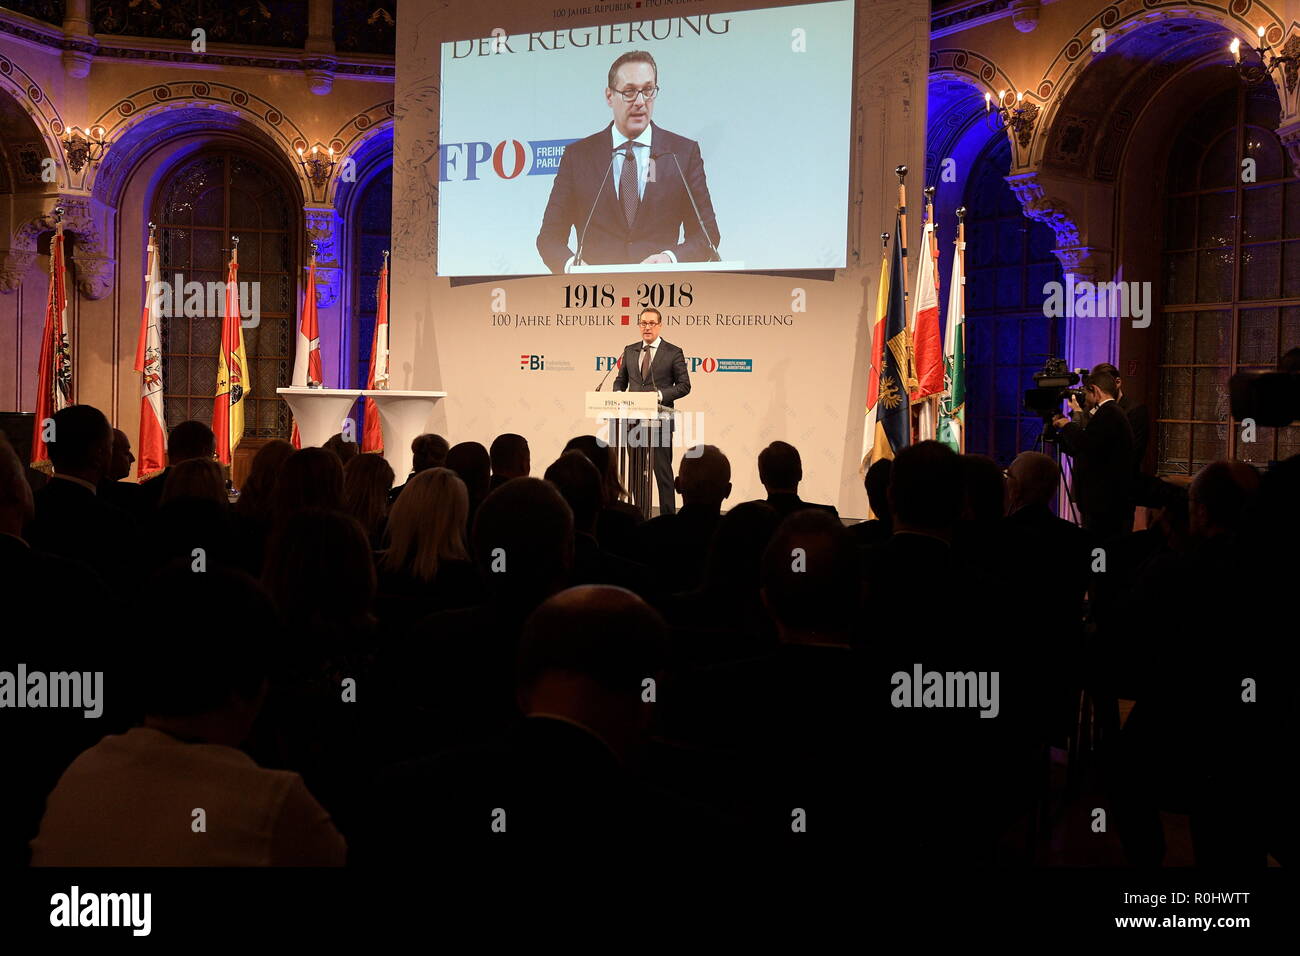 Vienna, Austria. 5th November 2018. The Freedom Education Institute, the FPÖ and the Freedom Parliamentary Club invited to the symposium and ceremony "1918 - 2018: 100 years of republic. Picture shows Heinz Christian Strache (FPÖ). Credit: Franz Perc / Alamy Live News Stock Photo